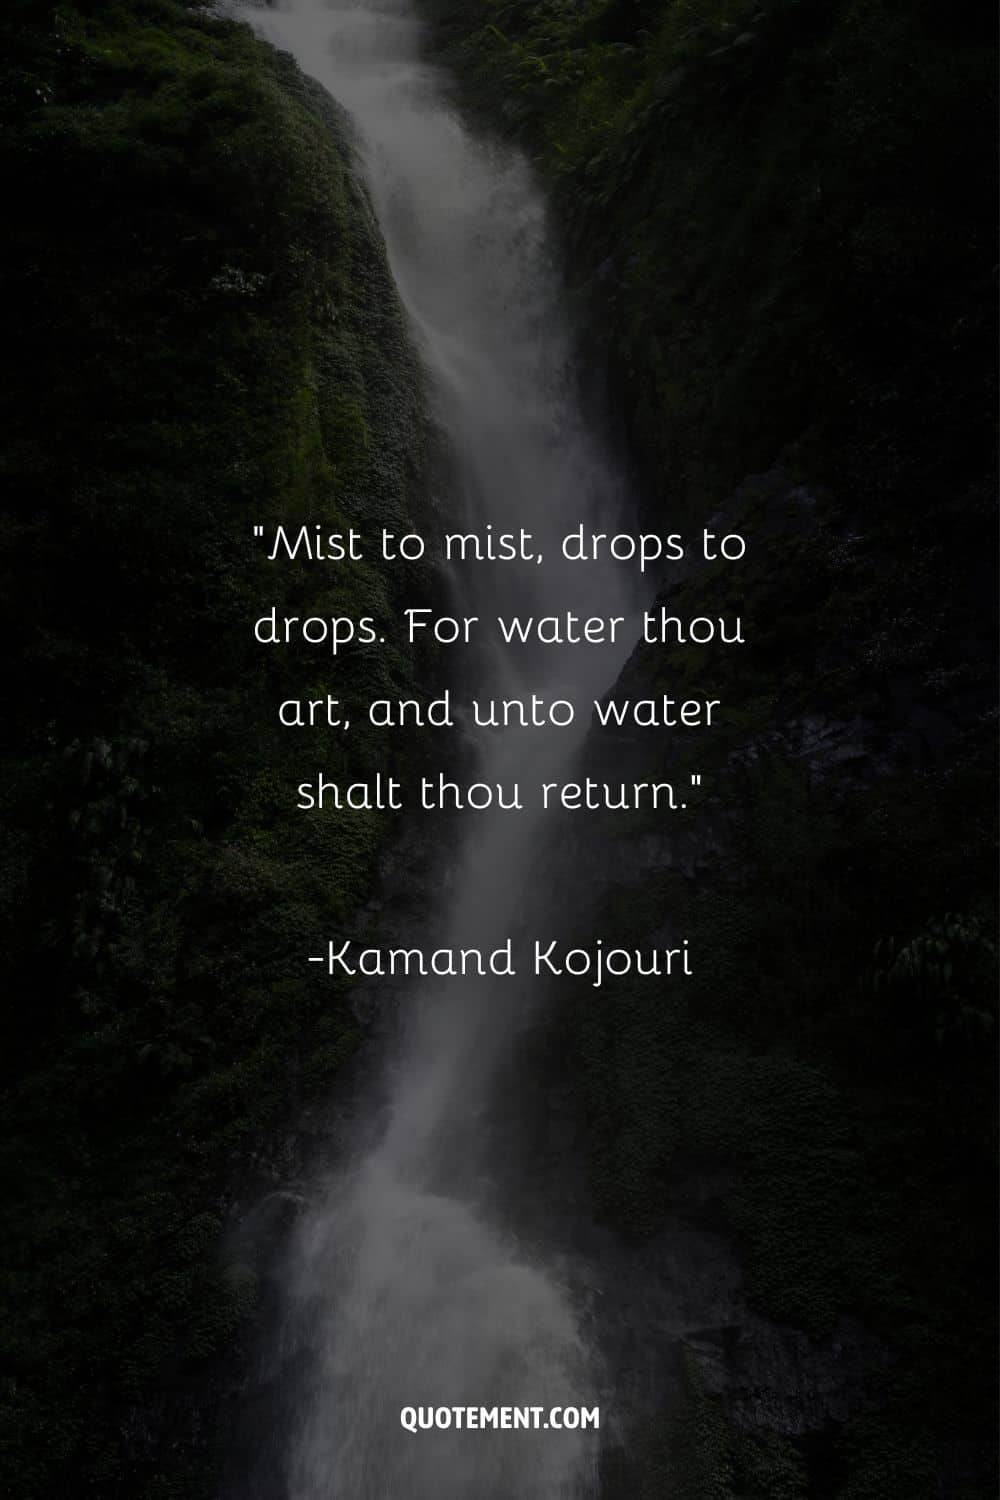 Powerful quote on water by Kamand Kojouri and a waterfall in the background
